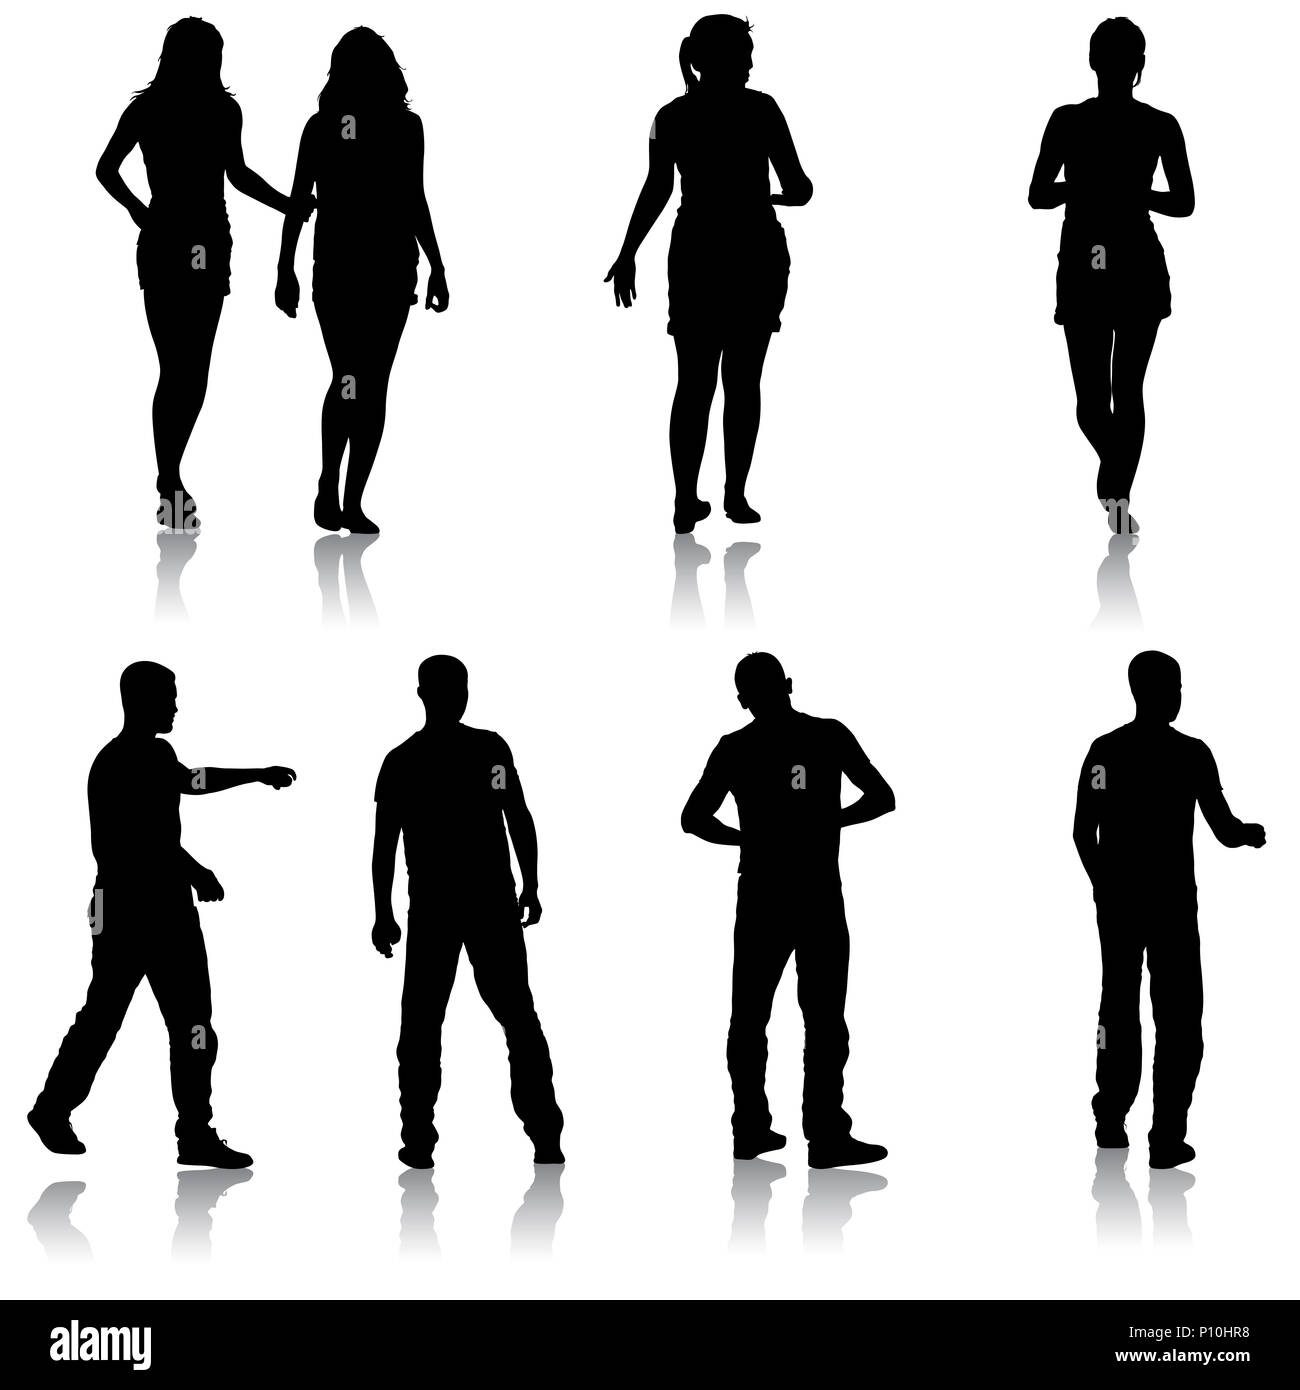 Black Silhouette Group Of People Standing In Various Poses Stock  Illustration - Download Image Now - iStock